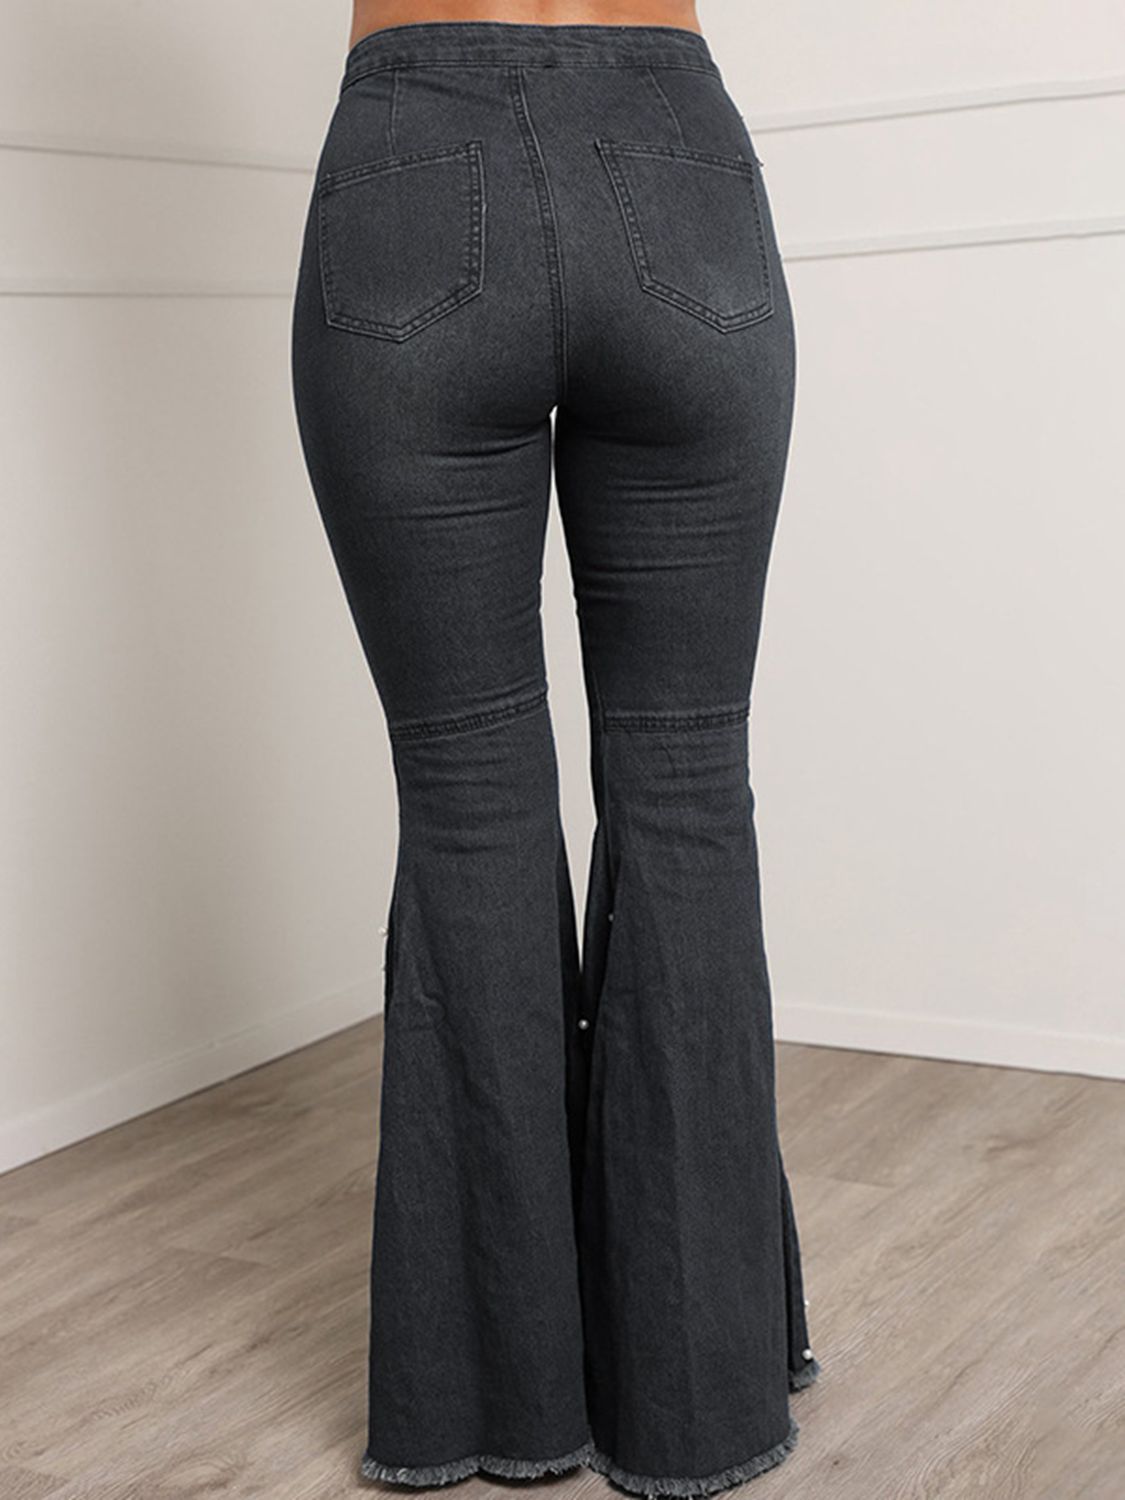 Button Fly Flare Jeans - ONLINE EXCLUSIVE